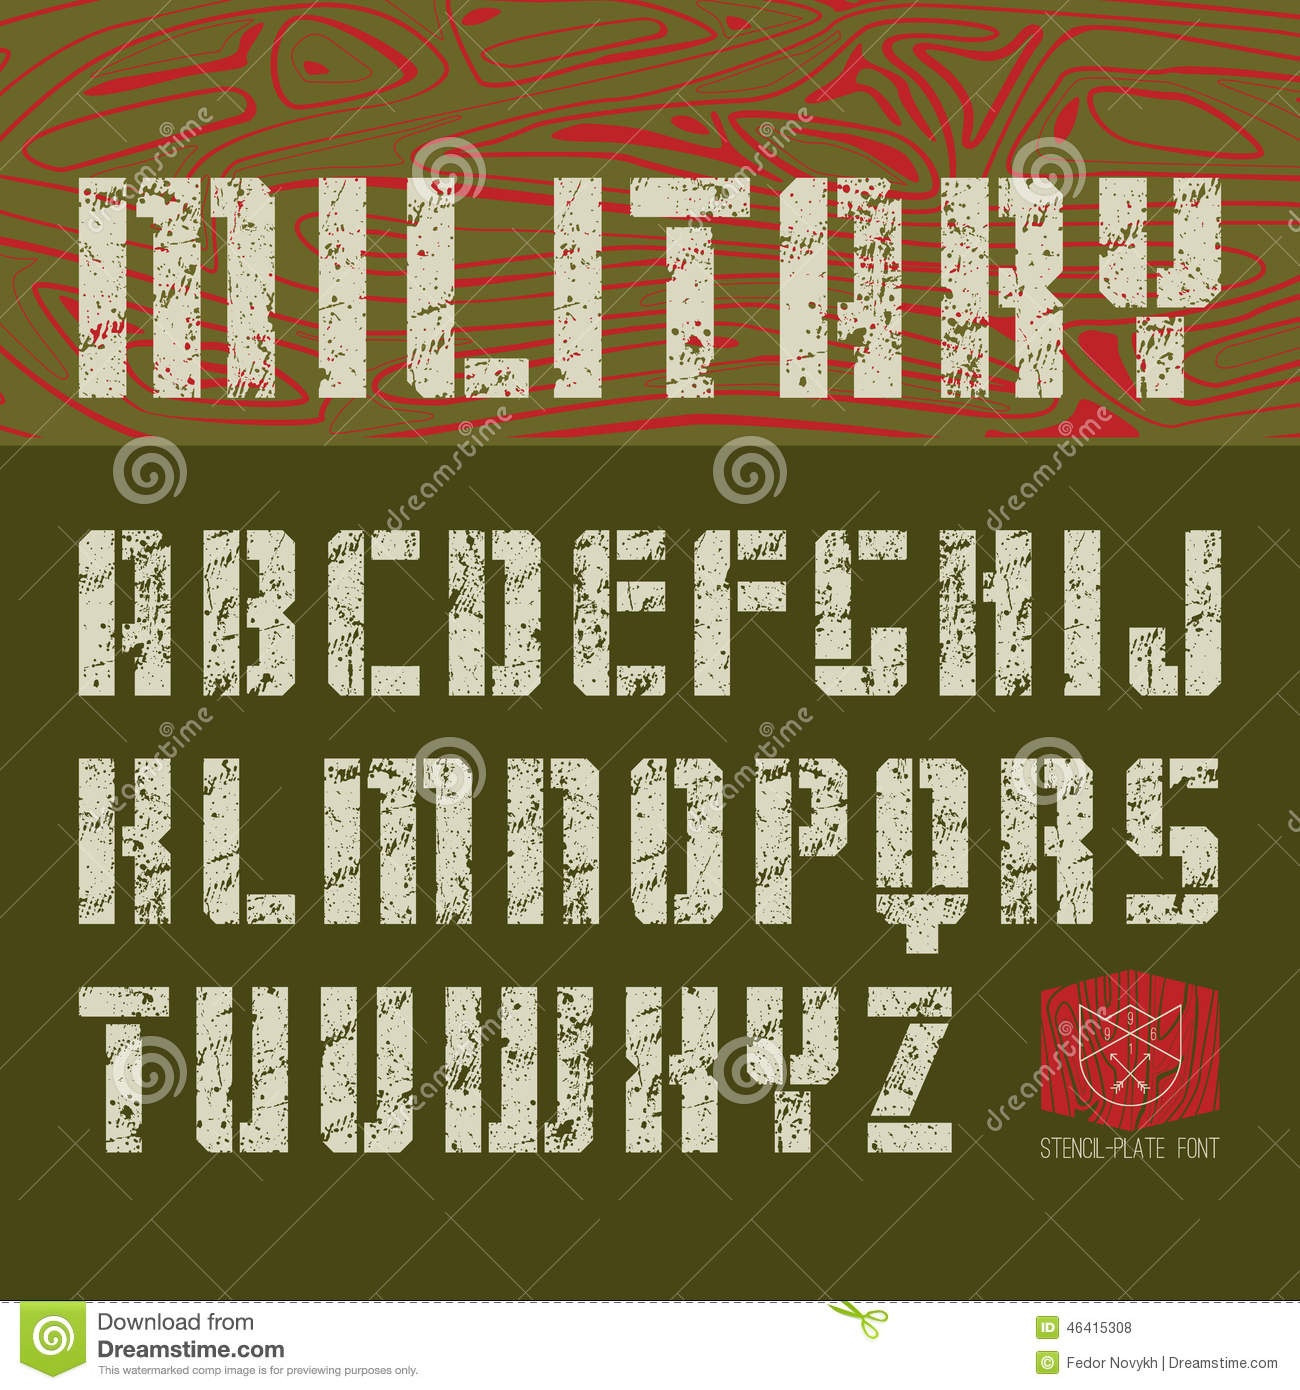 Military Style Stencil Font